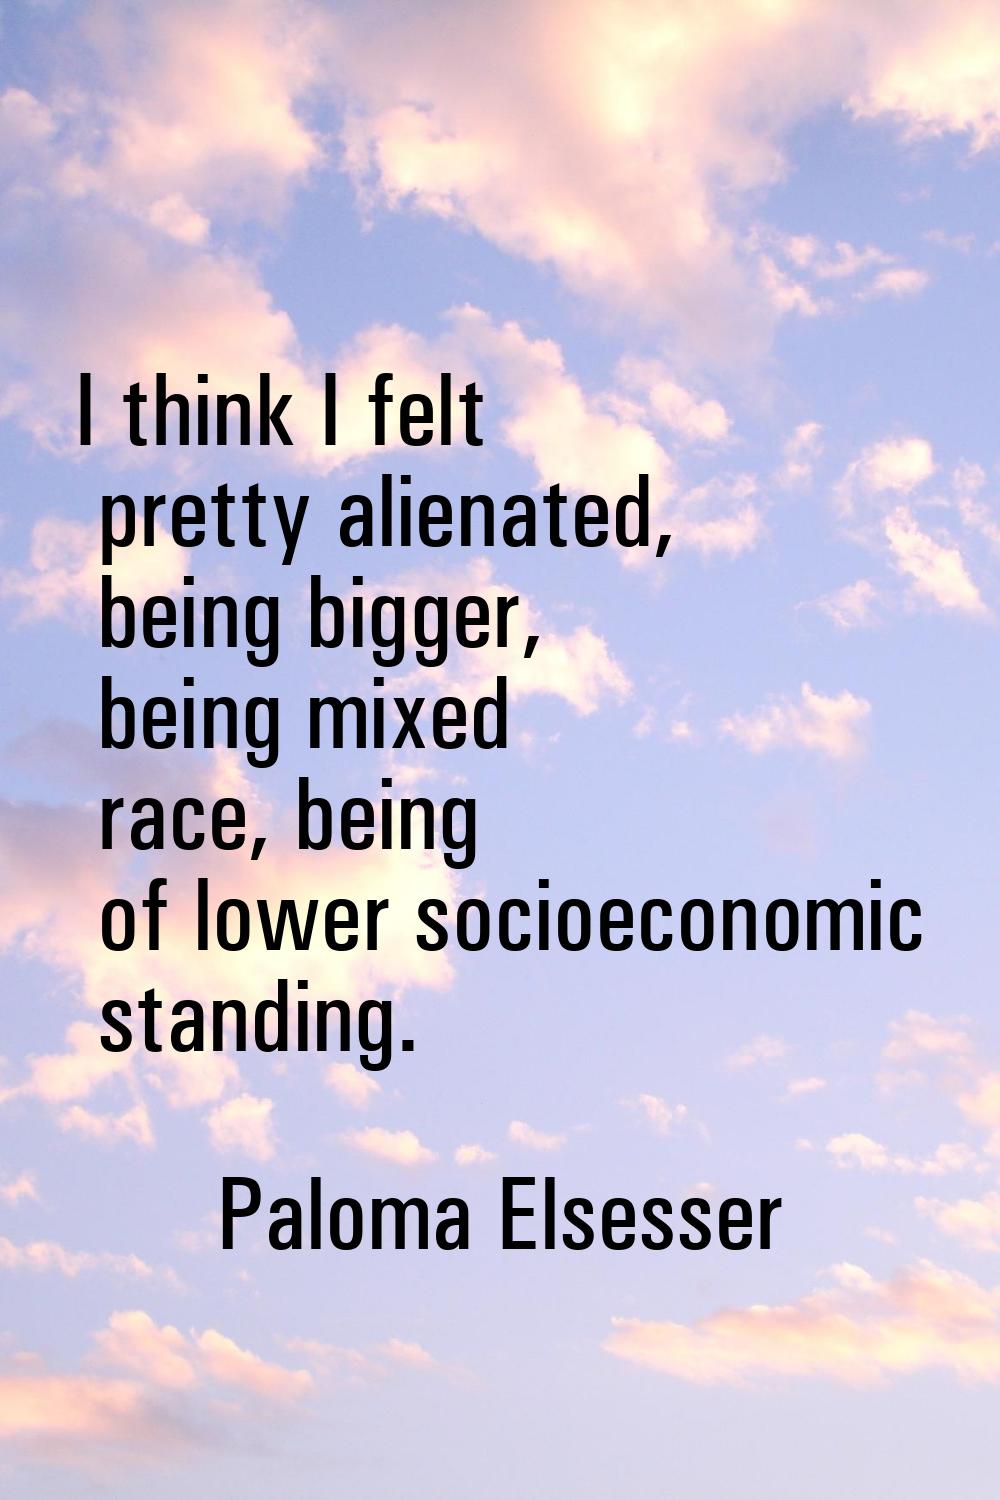 I think I felt pretty alienated, being bigger, being mixed race, being of lower socioeconomic stand